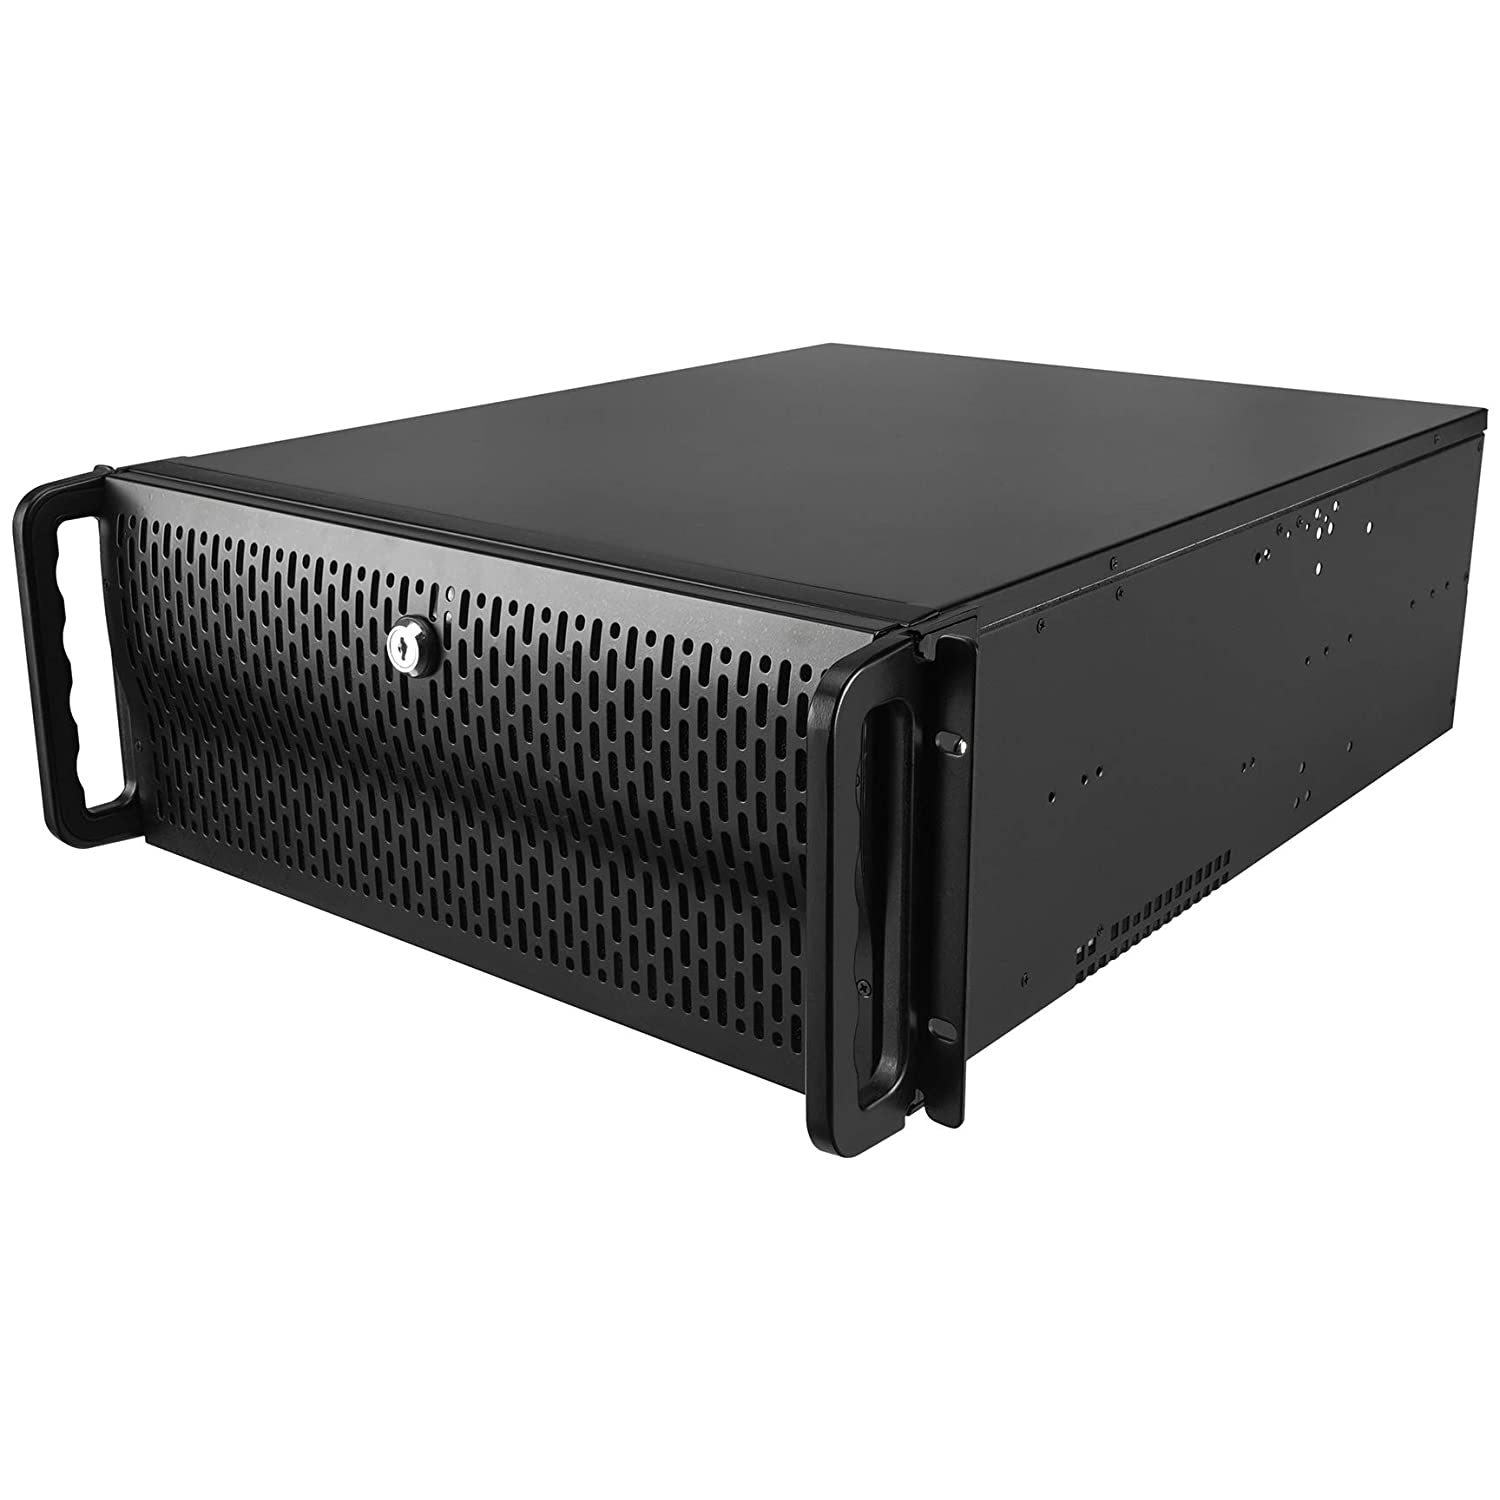 Server Chassis